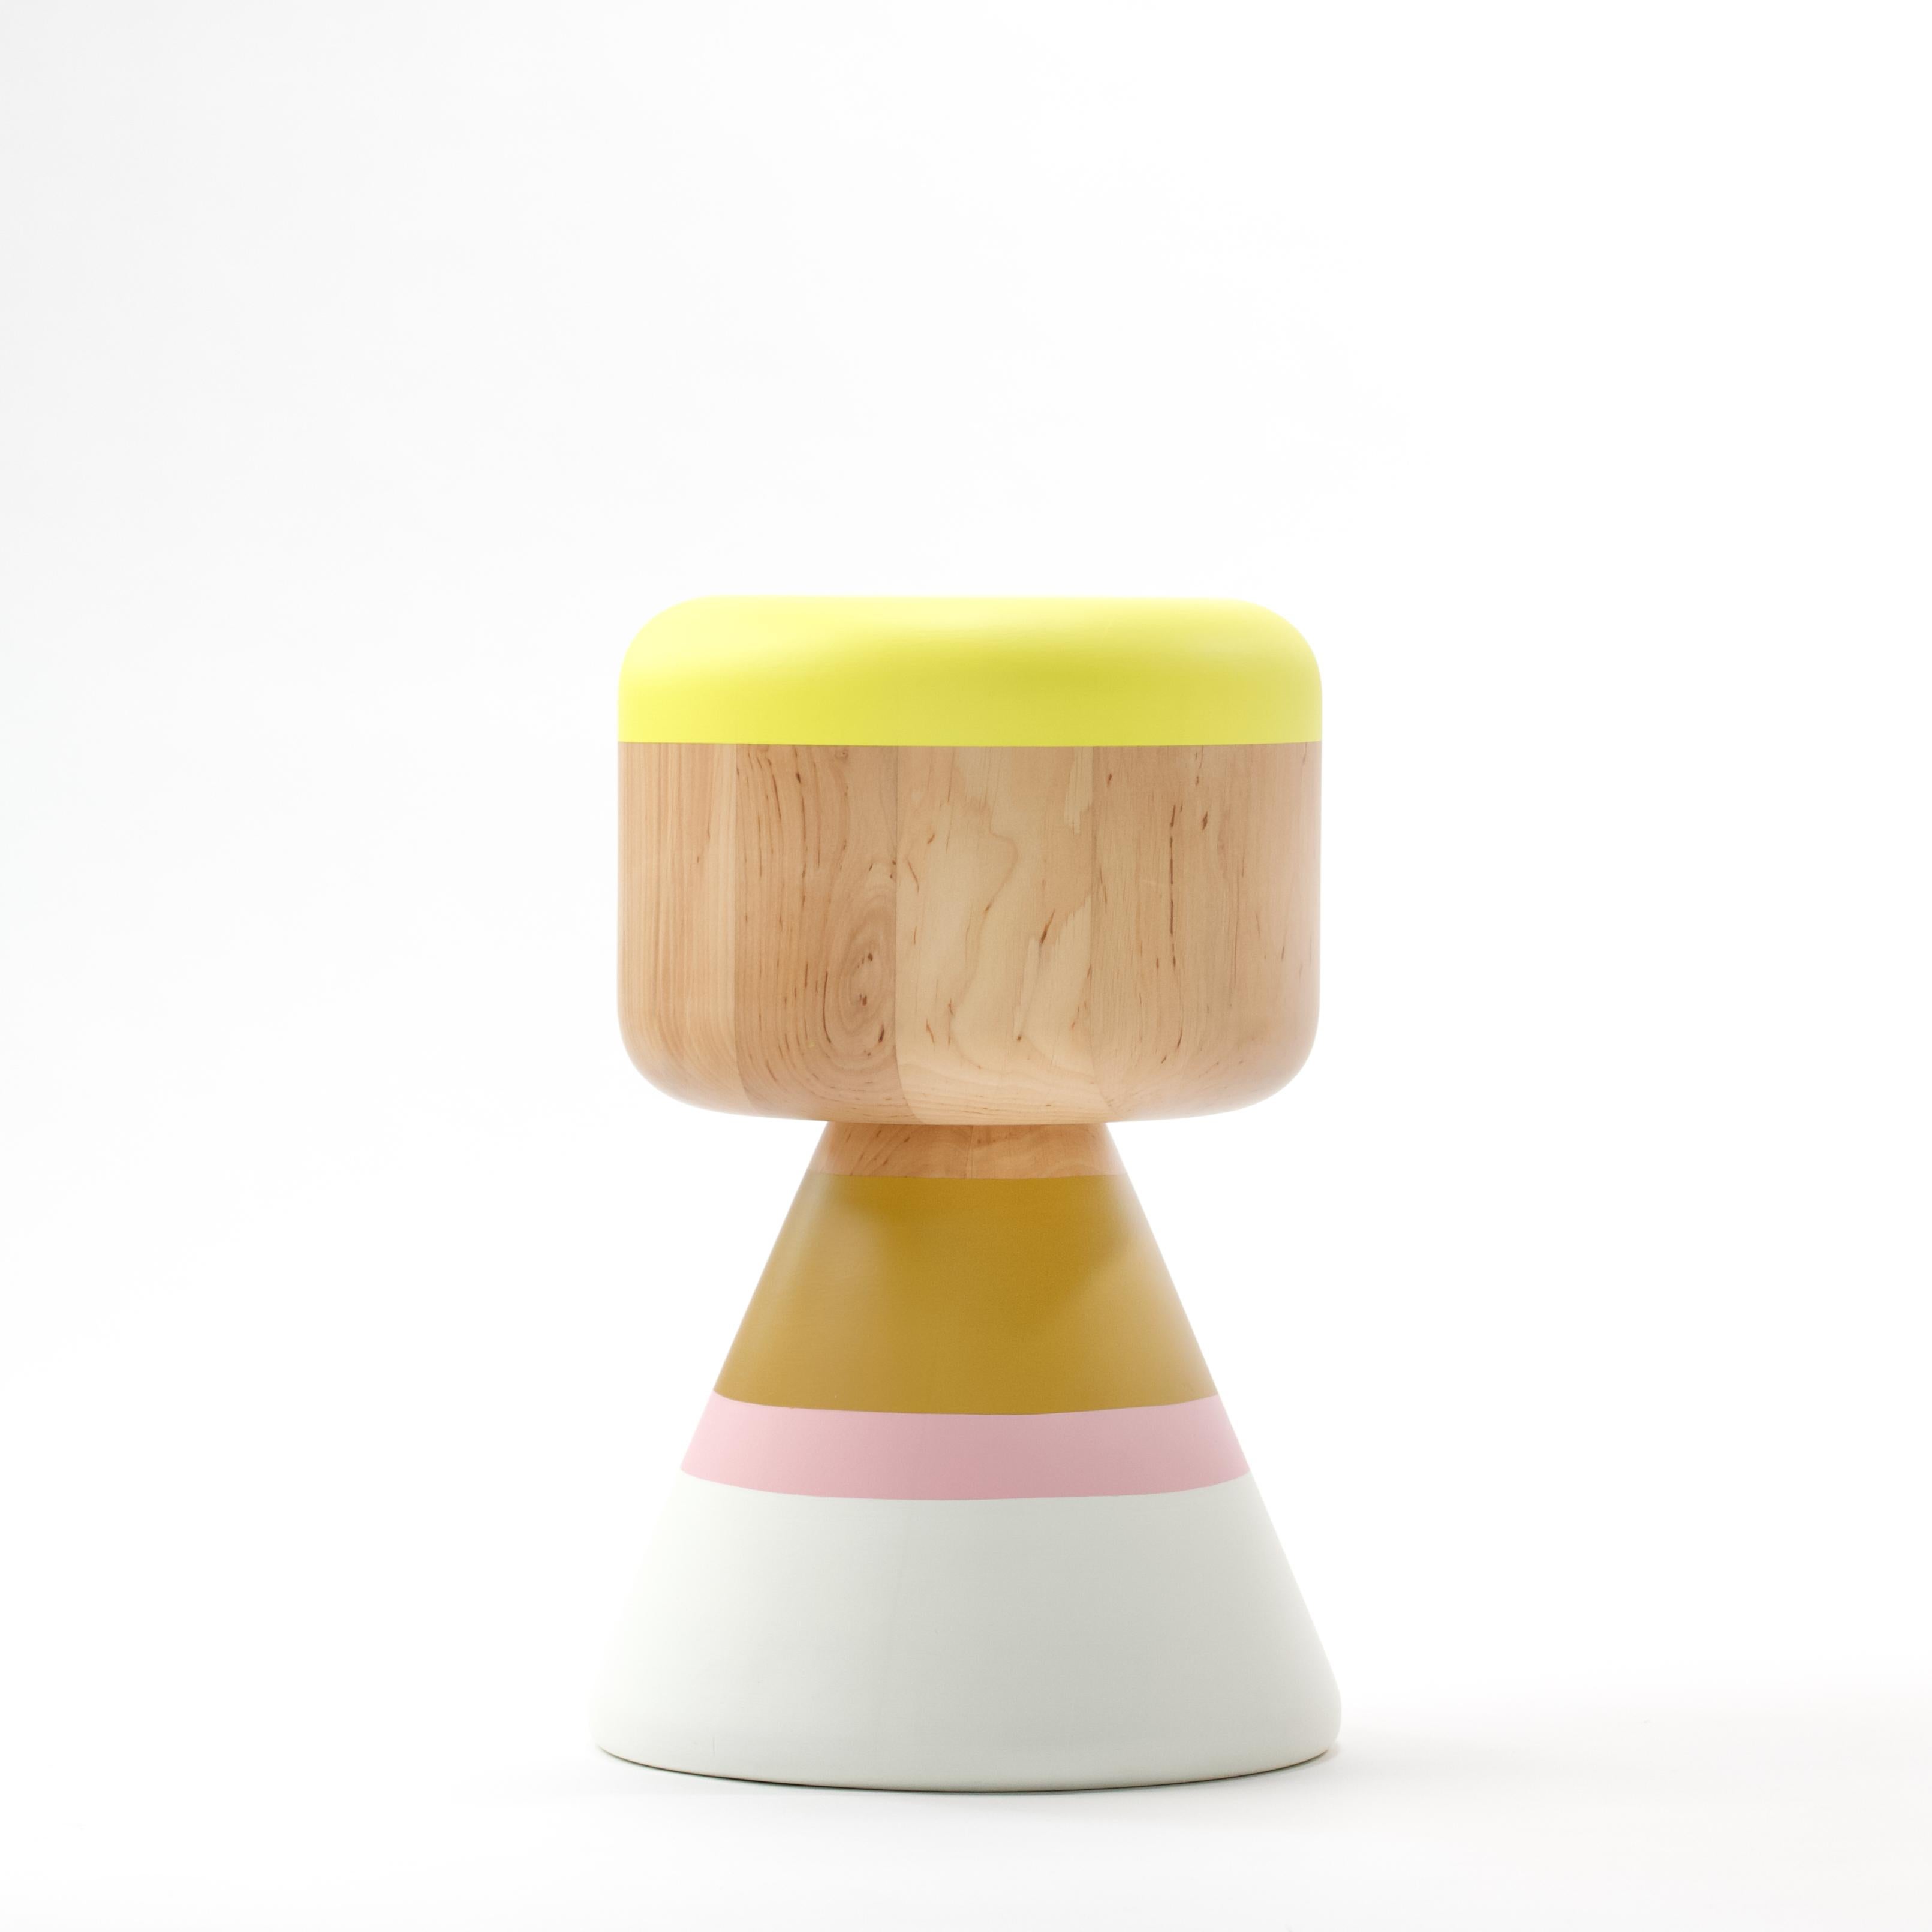 LOLO is a family of objects, stools or side tables all of which are alike, yet different - like you and me. An abstraction about diversification.

Designed by Pernille Iben Linde and Morten Linde. 

Local artisans have hand-turned the object in